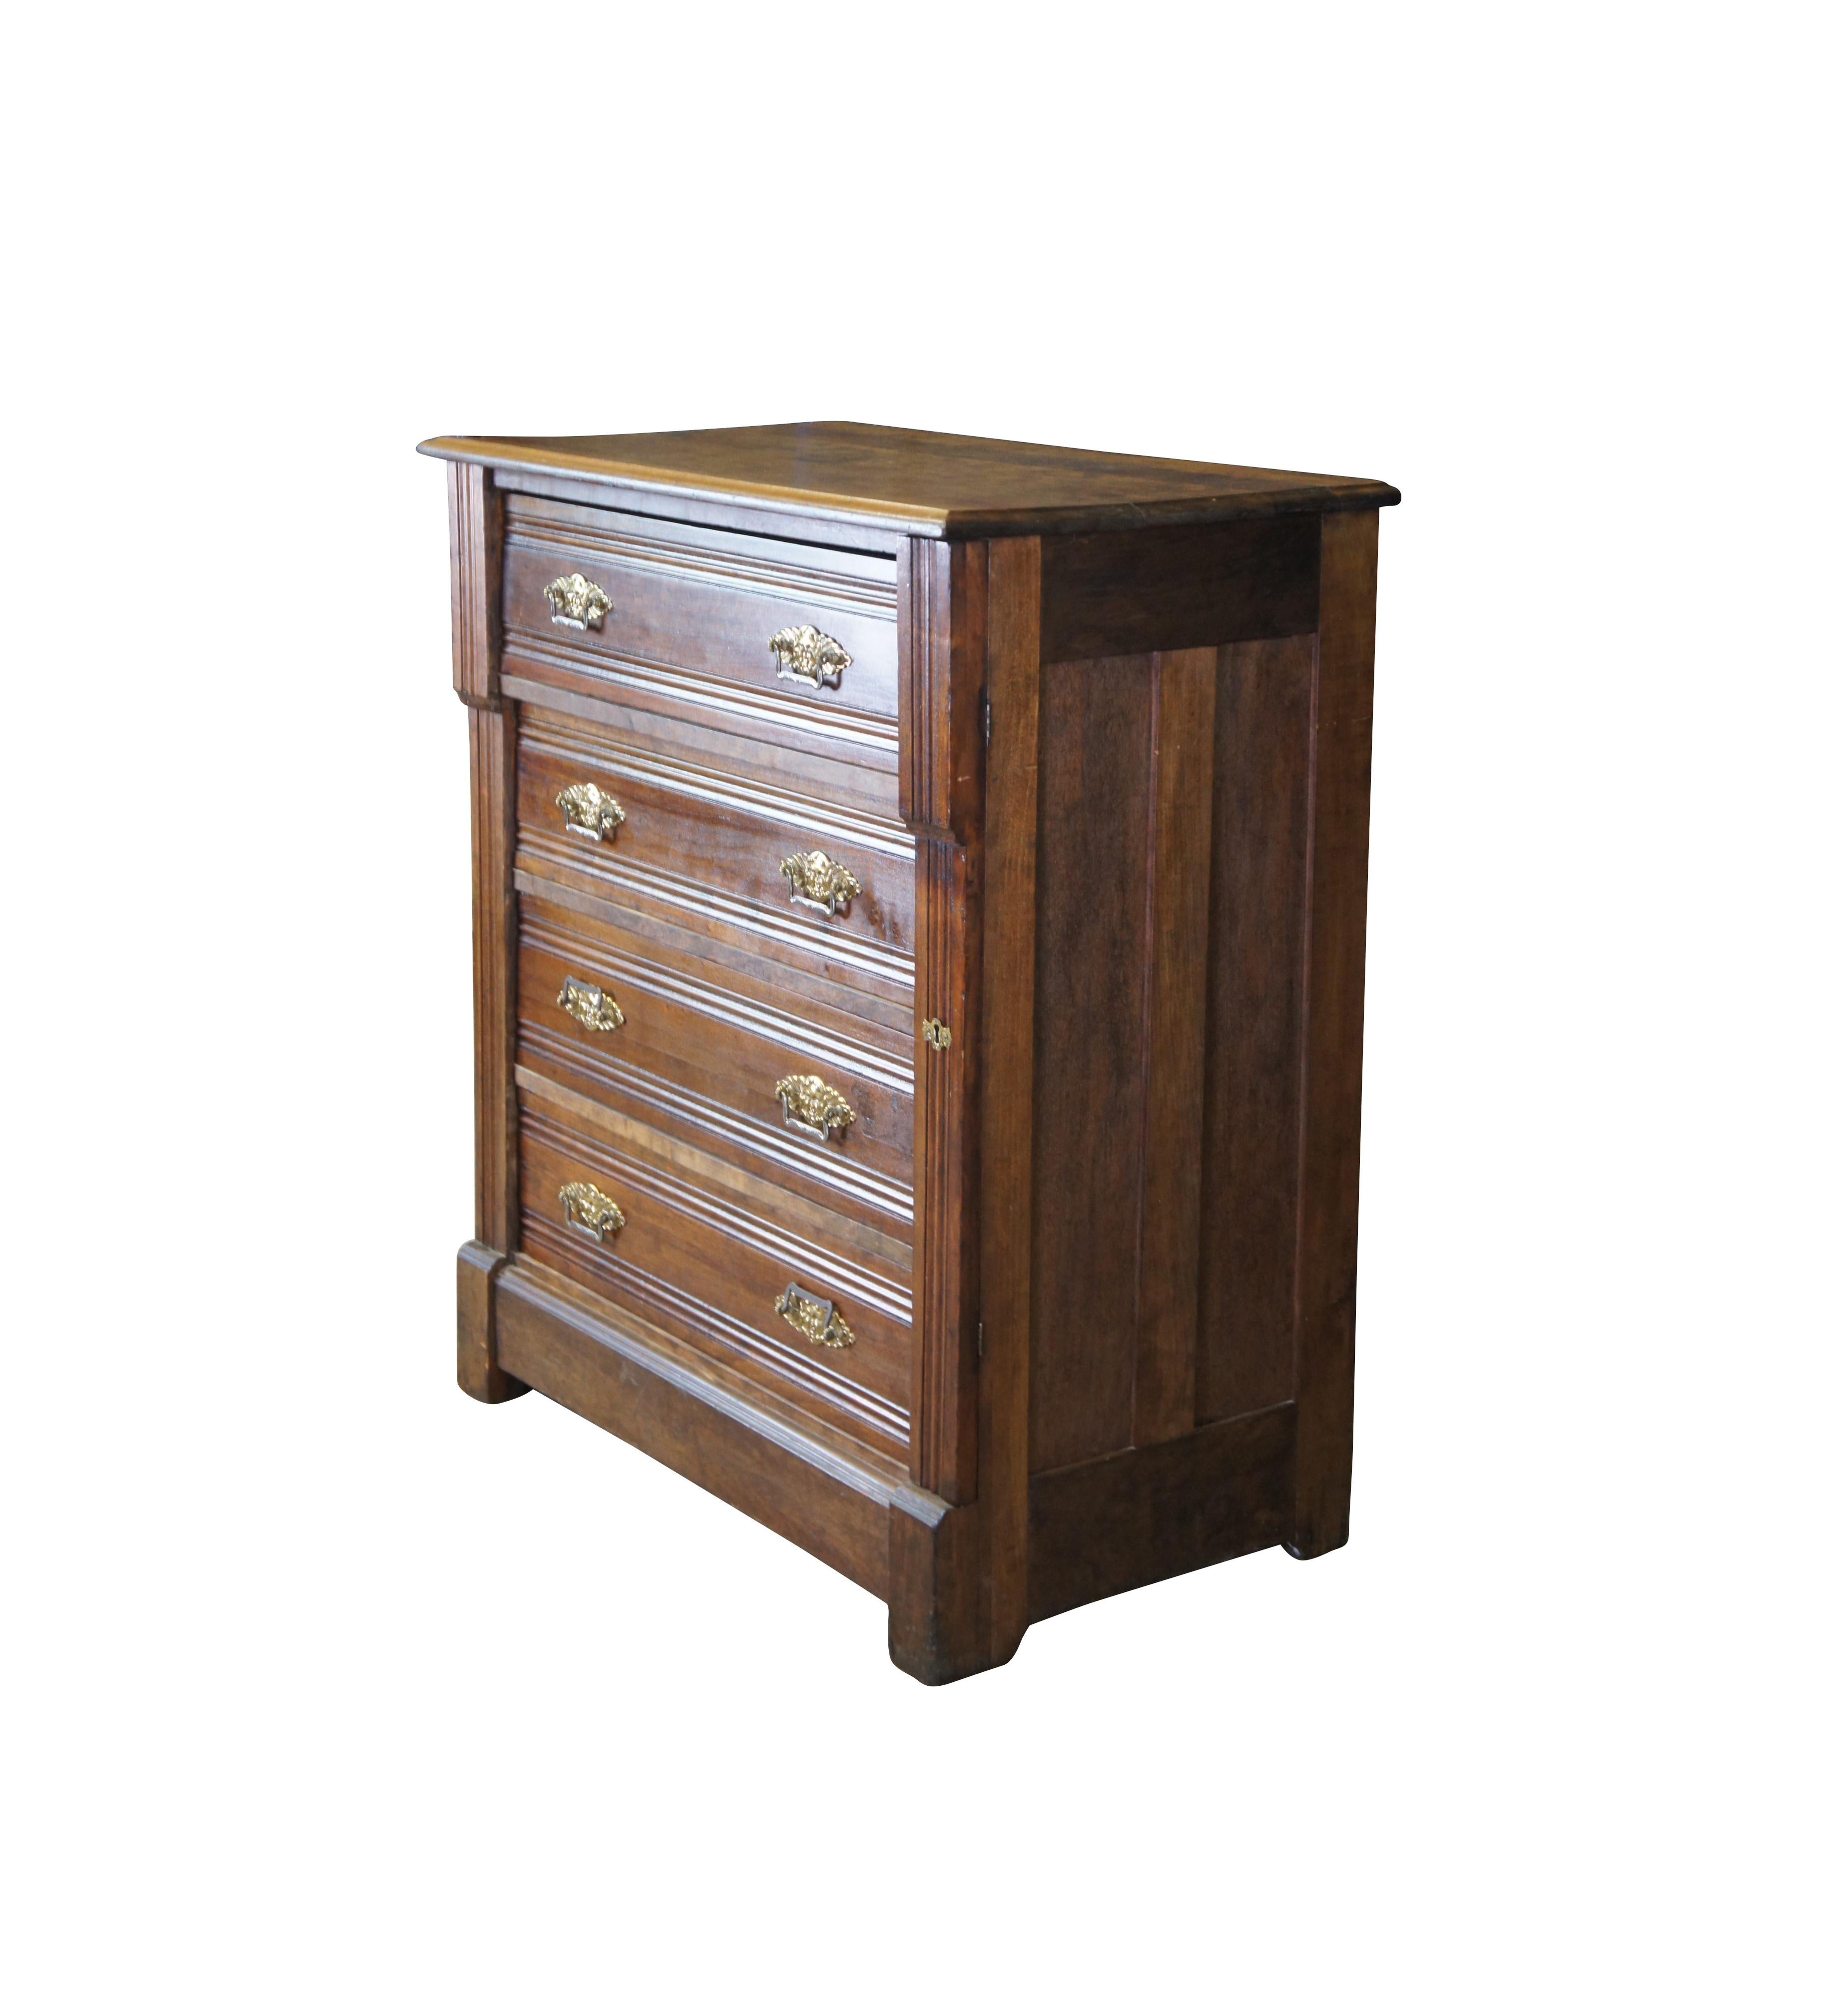 Antique Eastlake side lock chest of drawers, circa 1880s. Made of walnut featuring a side lock panel, four drawers and unique brass hardware with north wind face at the center.

This mythological Norse-like figure is a common characteristic of a